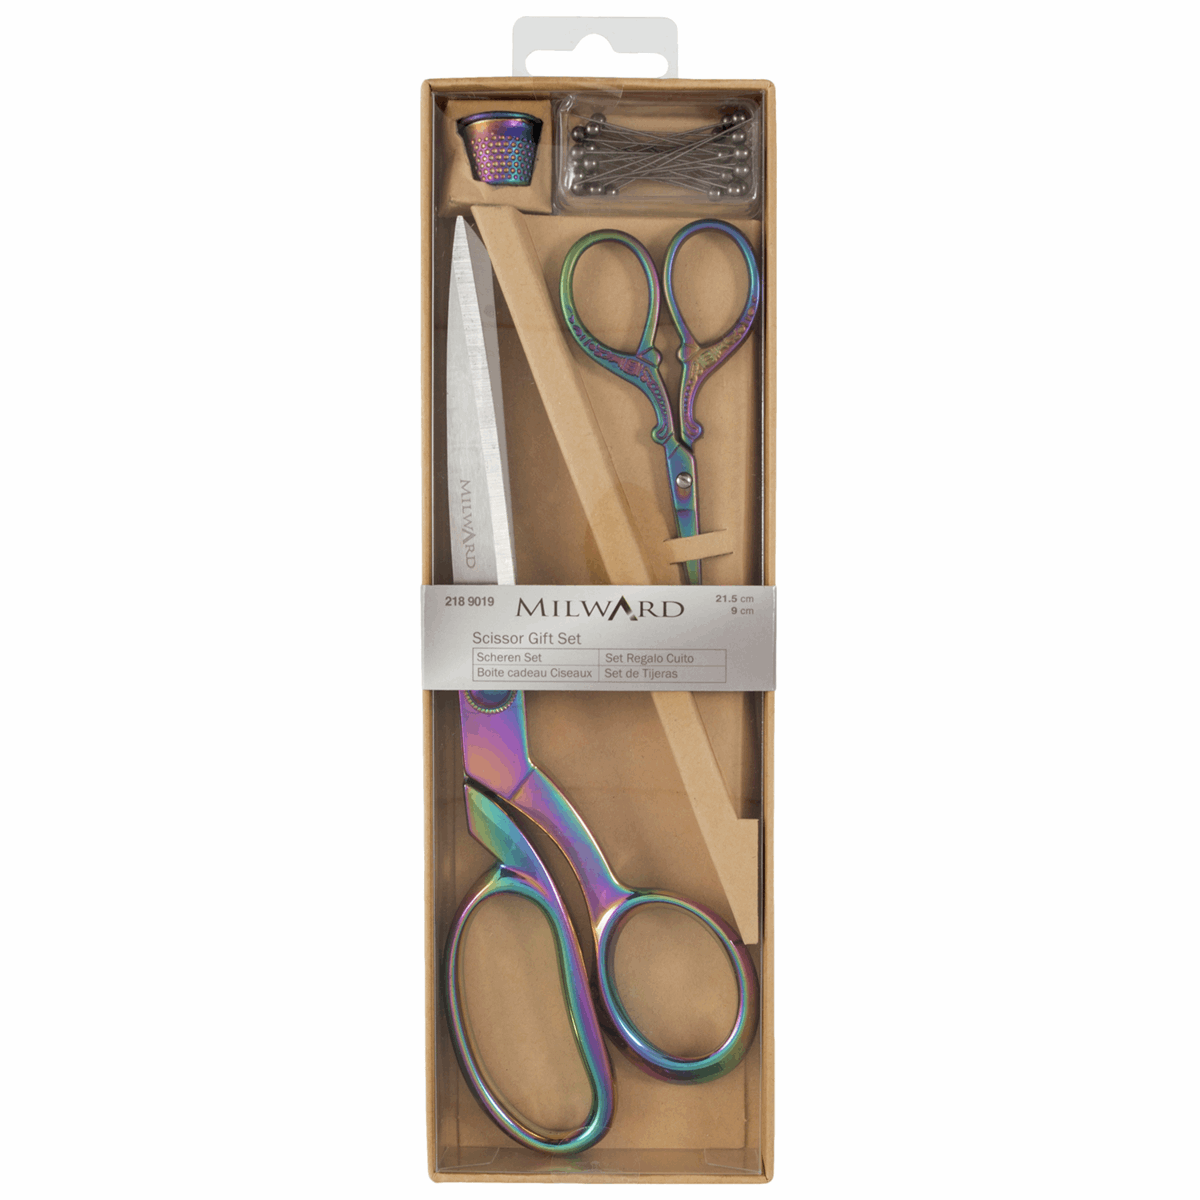 Gift Set: Scissors: Dressmaking (21.5cm) and Embroidery (9.5cm), Thimble And Pins: Rainbow